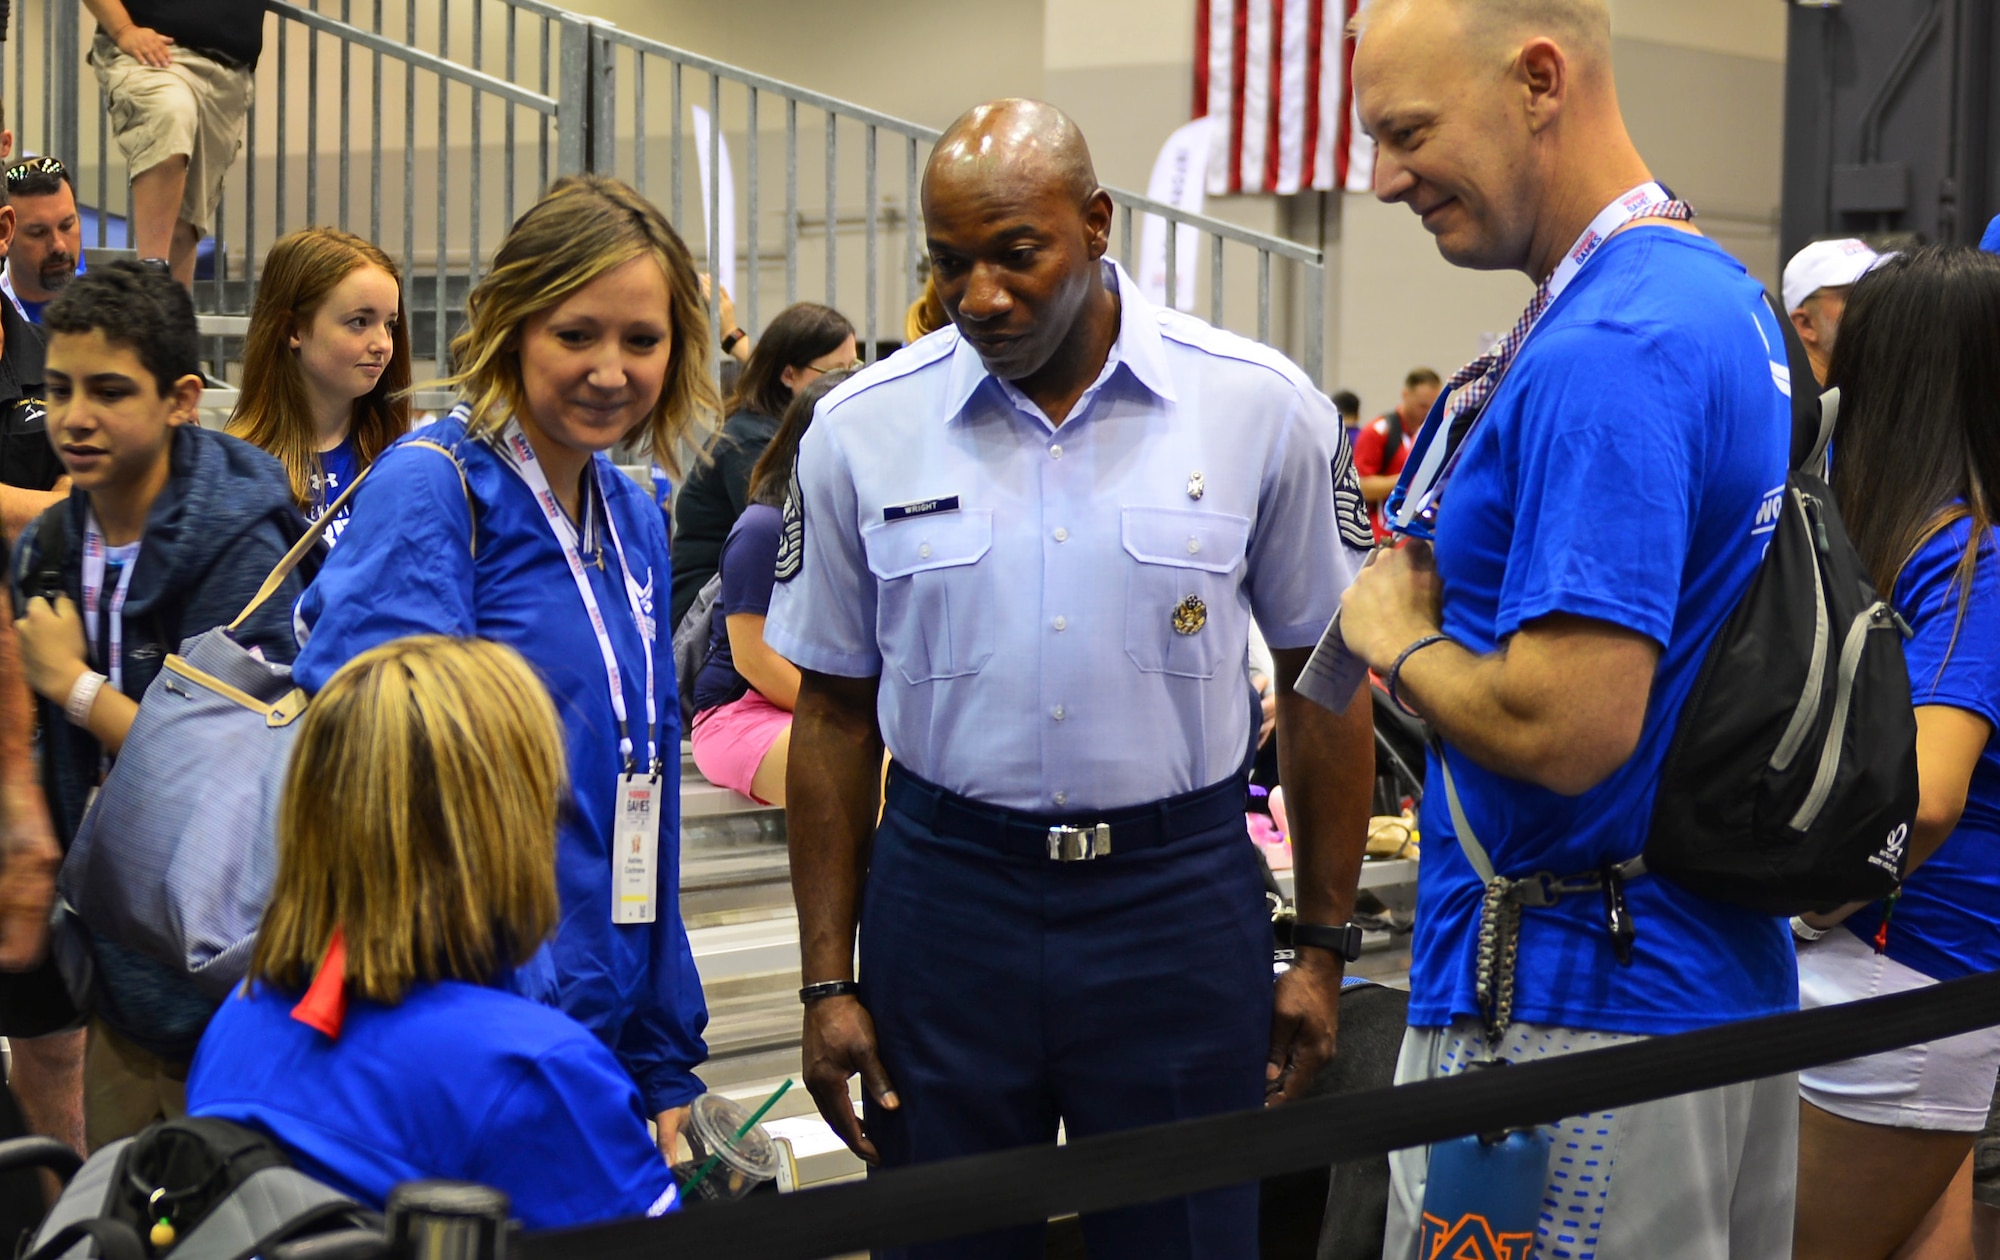 Chief Master Sgt. of the Air Force Kaleth O. Wright speaks with Staff Sgt. Melinda Smith, a finance and comptroller troop from Keyser, W.Va., at the 2017 Warrior Games July 1, 2017 at McCormick Place-Lakeside Center in Chicago. Smith will participate in archery, field, shooting and track in this year’s games. (U.S. Air Force photo/Staff Sgt. Chip Pons)